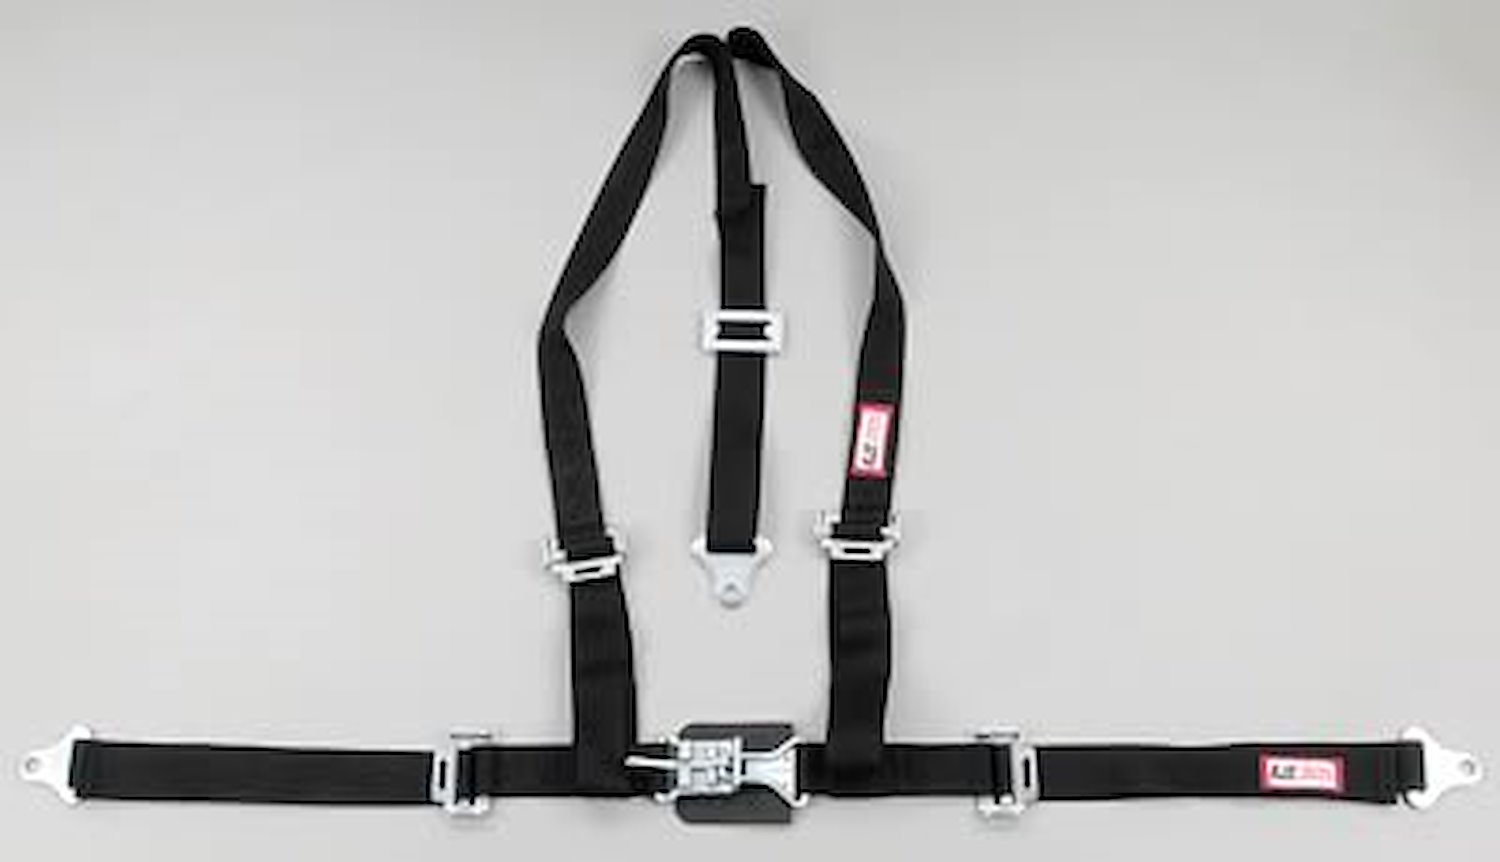 NON-SFI L&L HARNESS 3 PULL DOWN Lap Belt SNAP SEWN IN 2 S.H. Individual FLOOR Mount w/STERNUM STRAP WRAP/BOLT BLUE